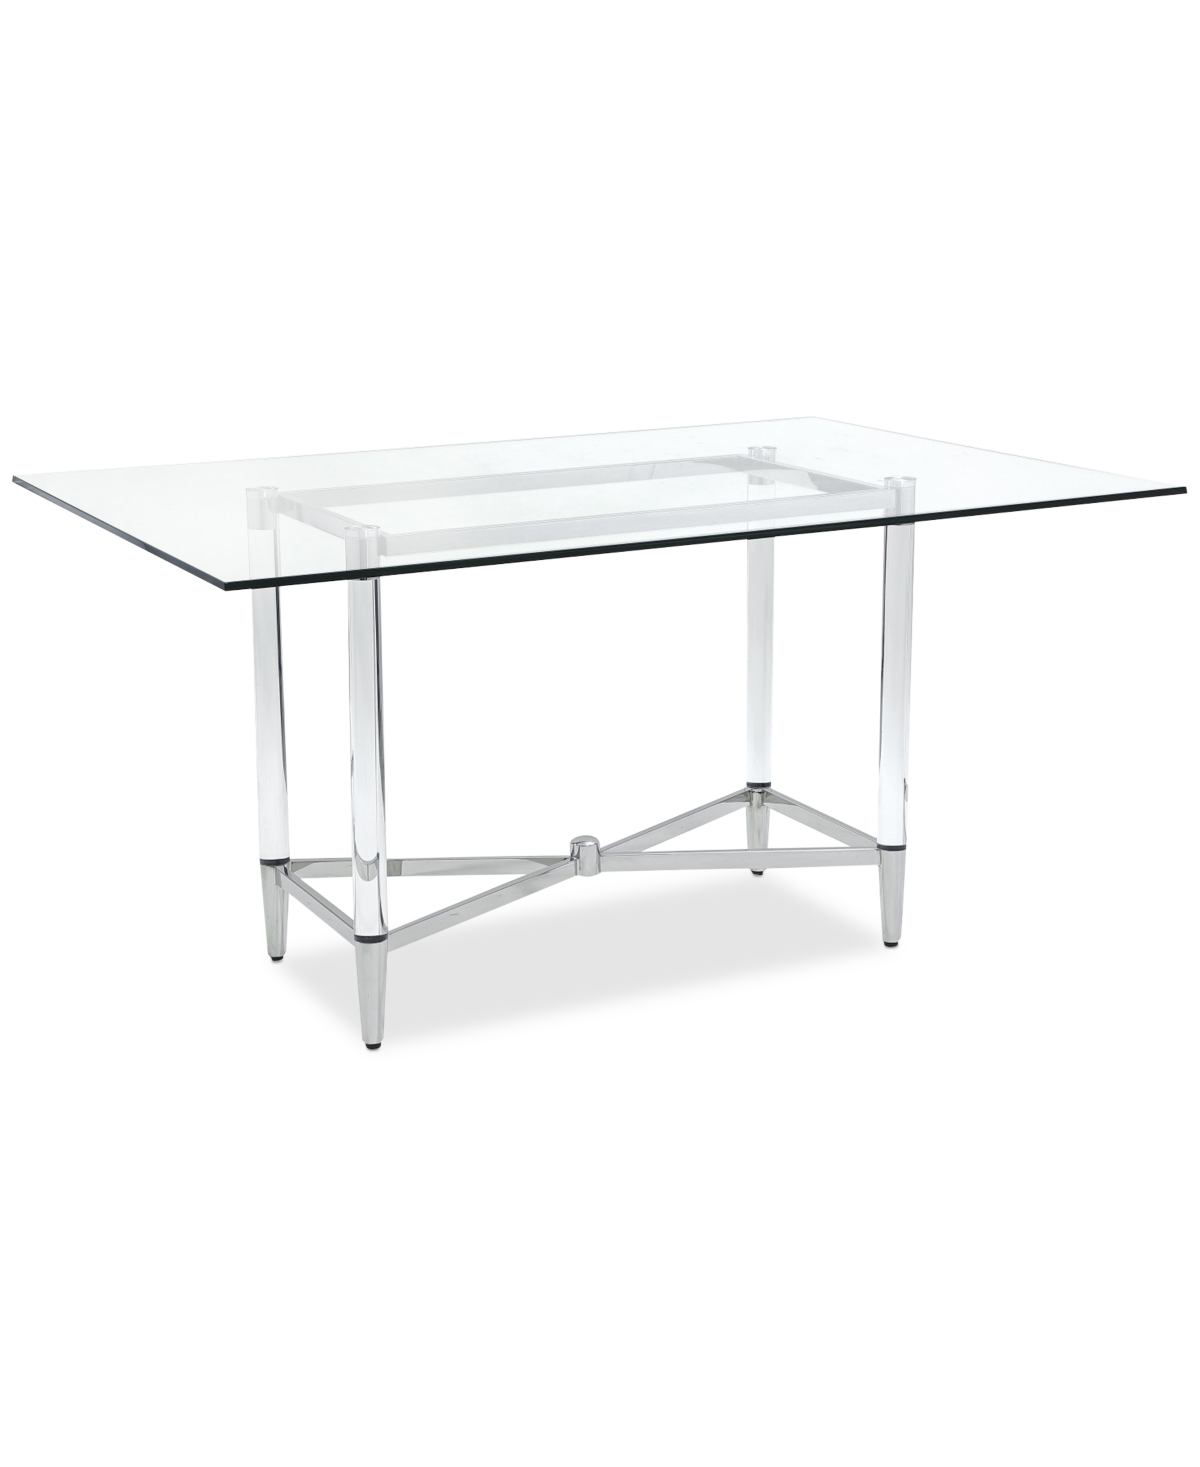 Furniture Marilyn Glass And Acrylic Dining Table